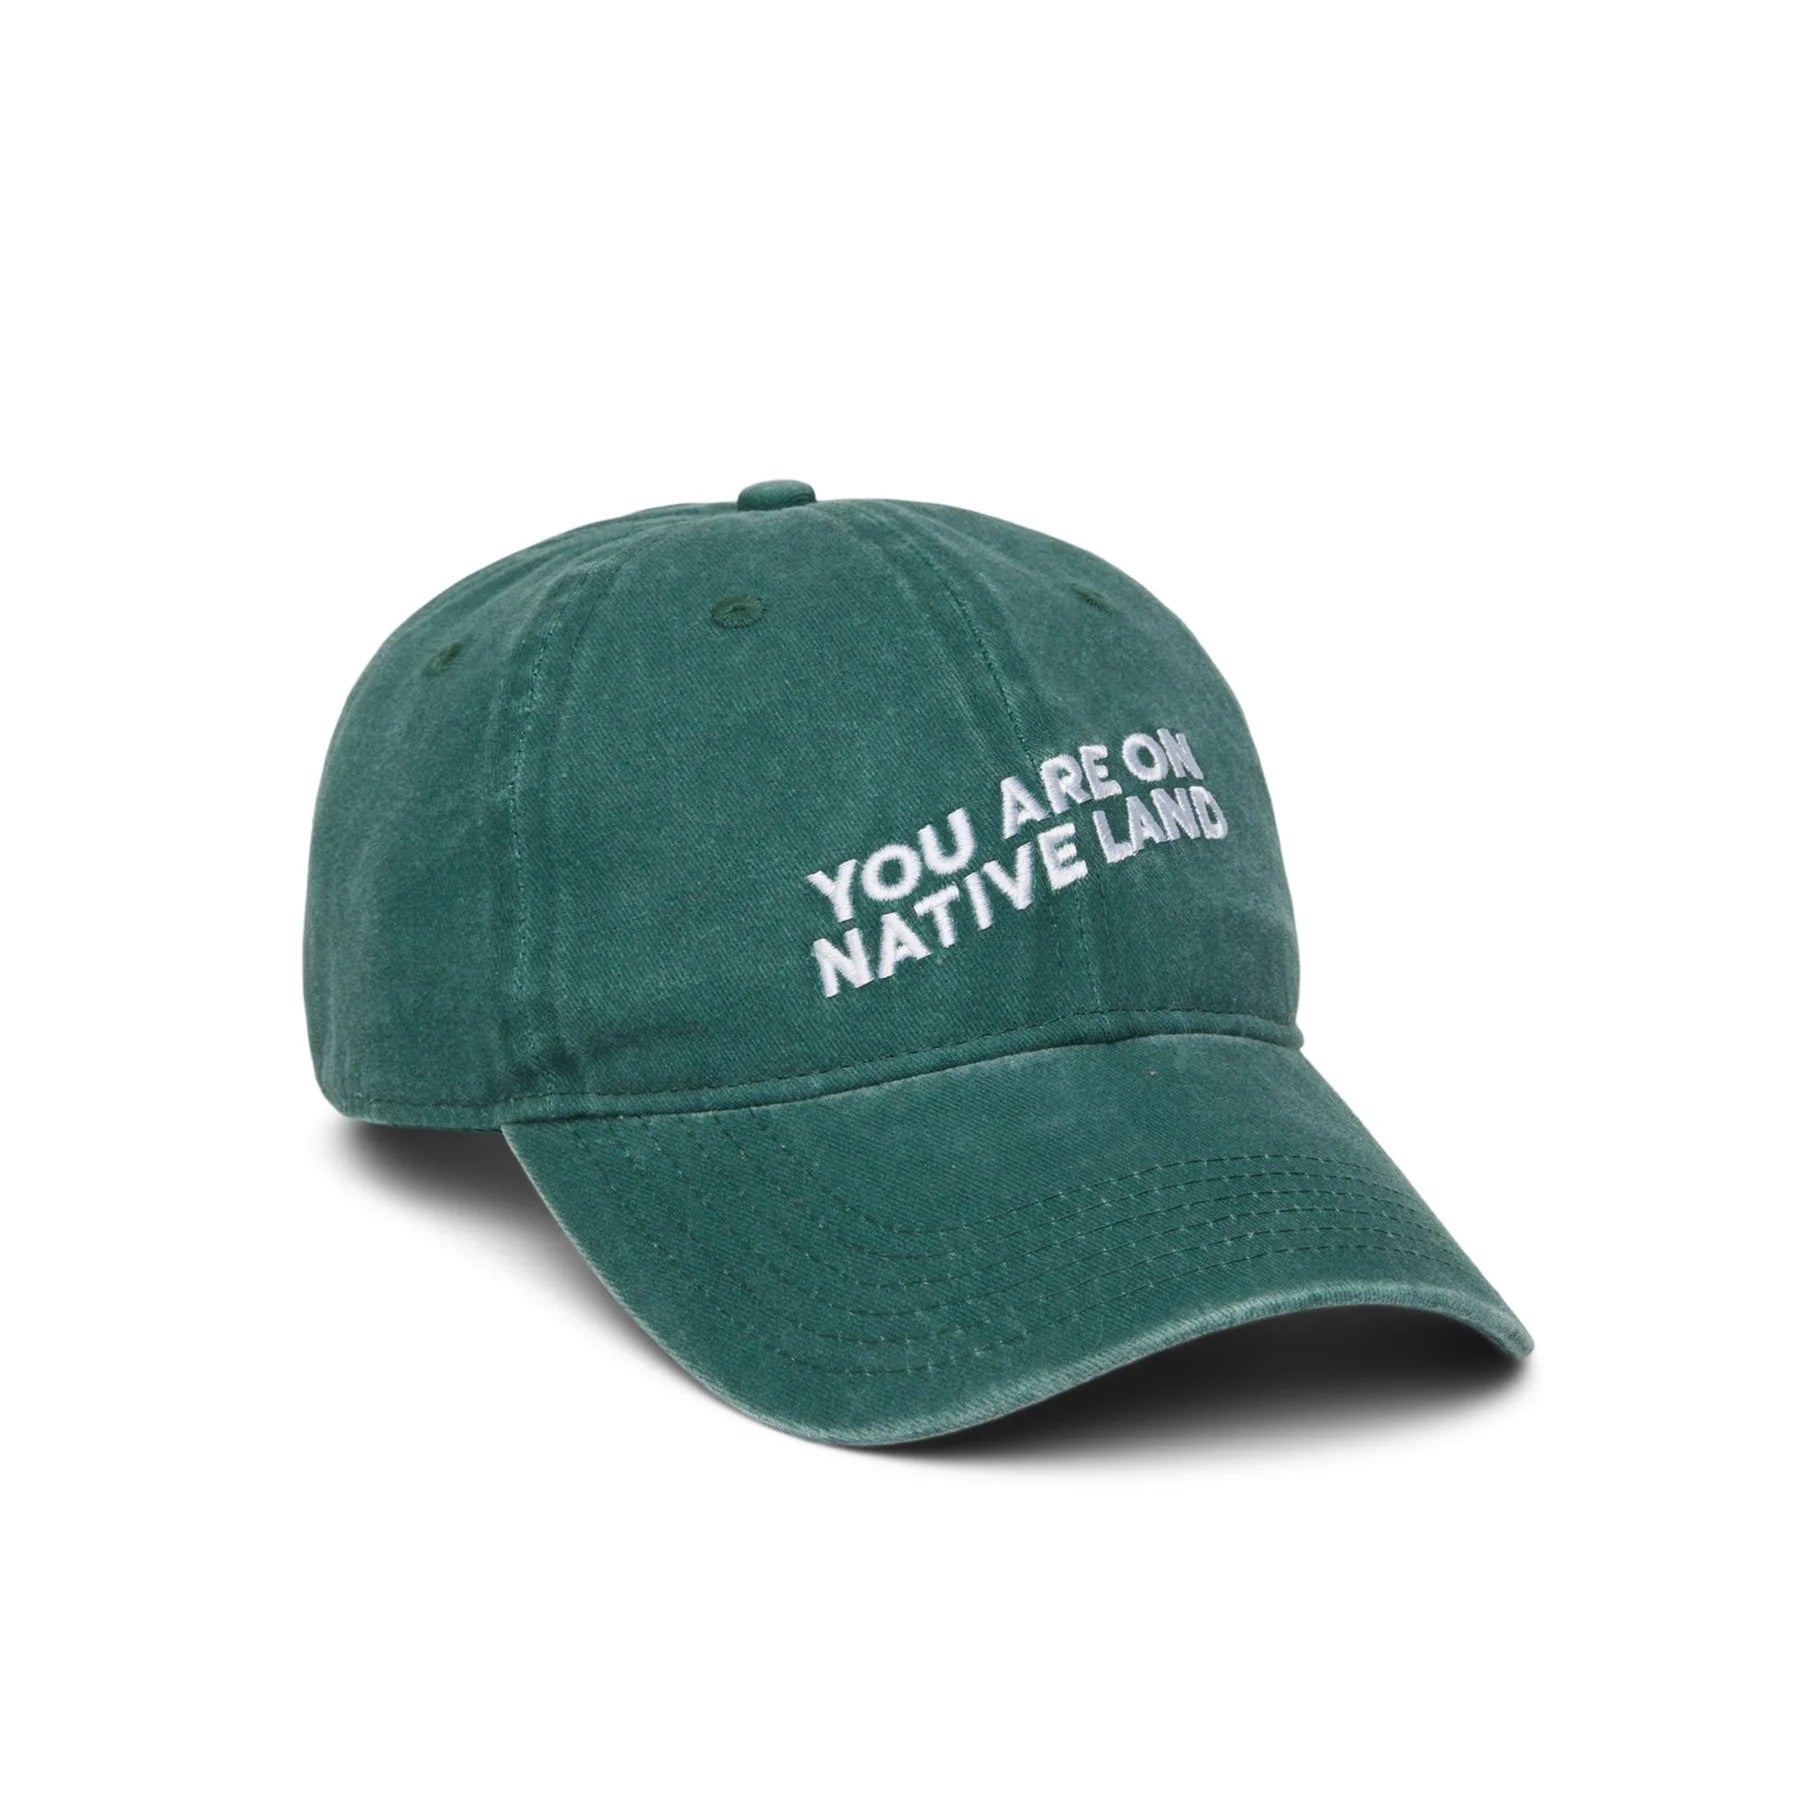 'YOU ARE ON NATIVE LAND' Dad Cap